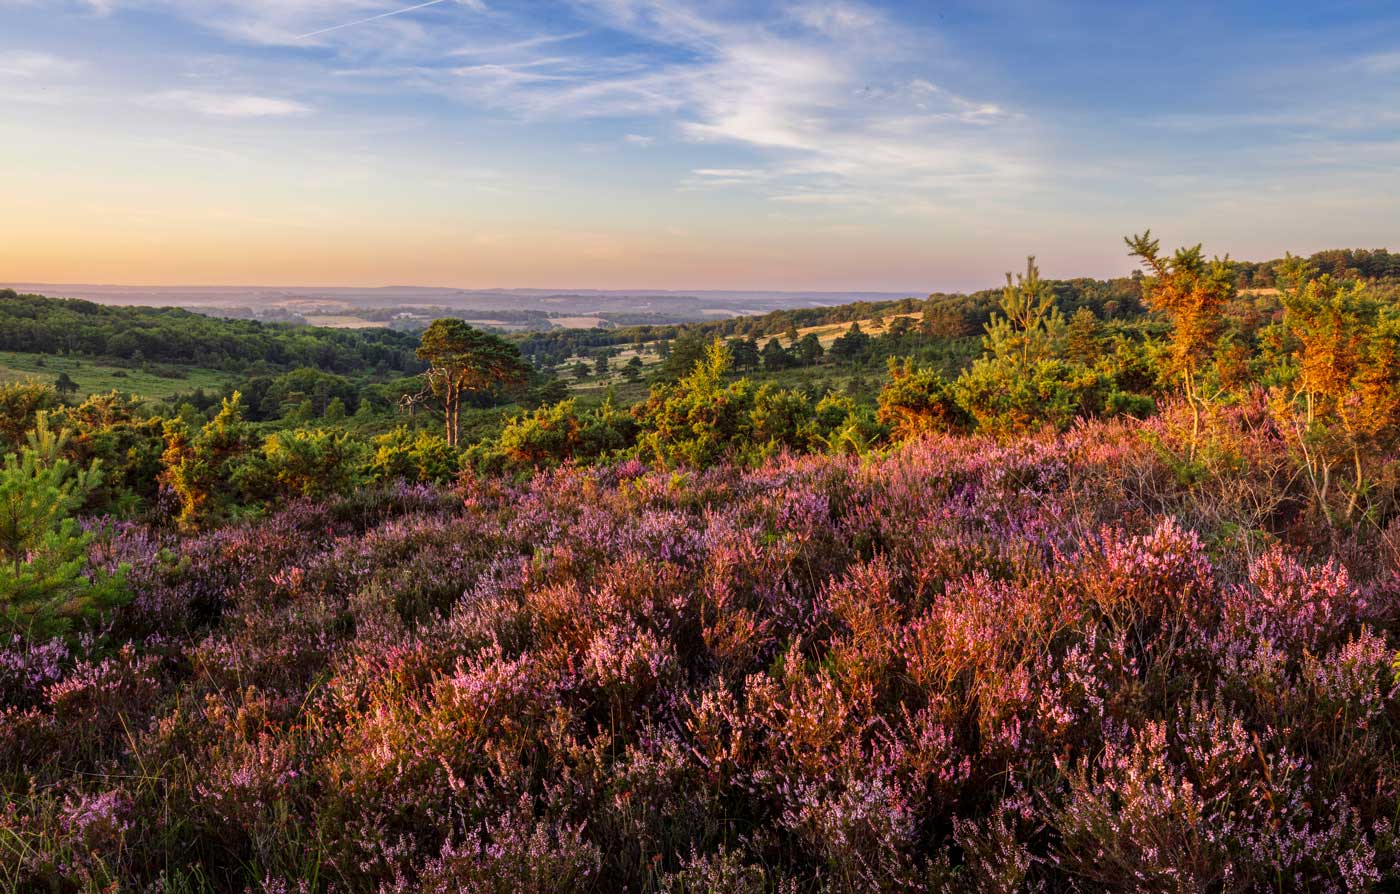 View over Ashdown Forest, beautiful sunrise